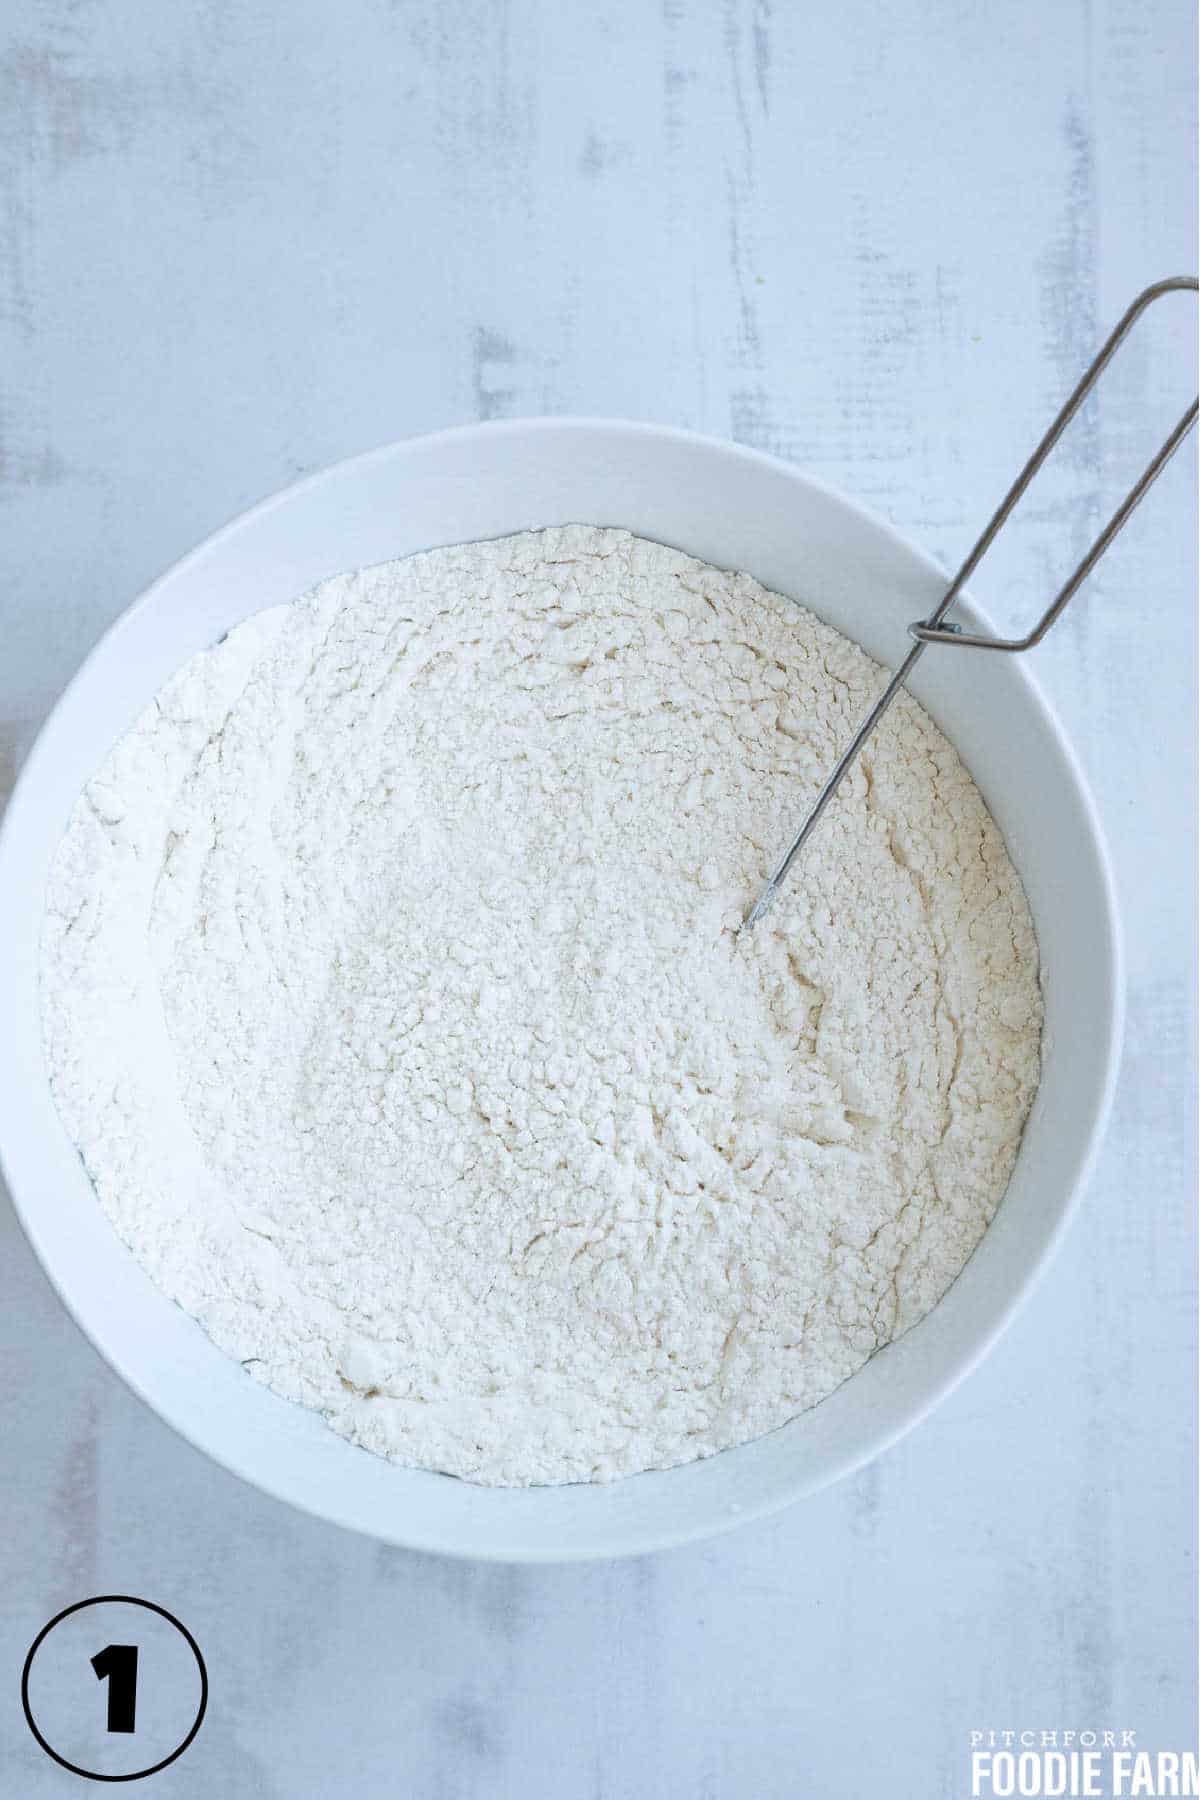 Flour, salt, and baking powder in a mixing bowl.